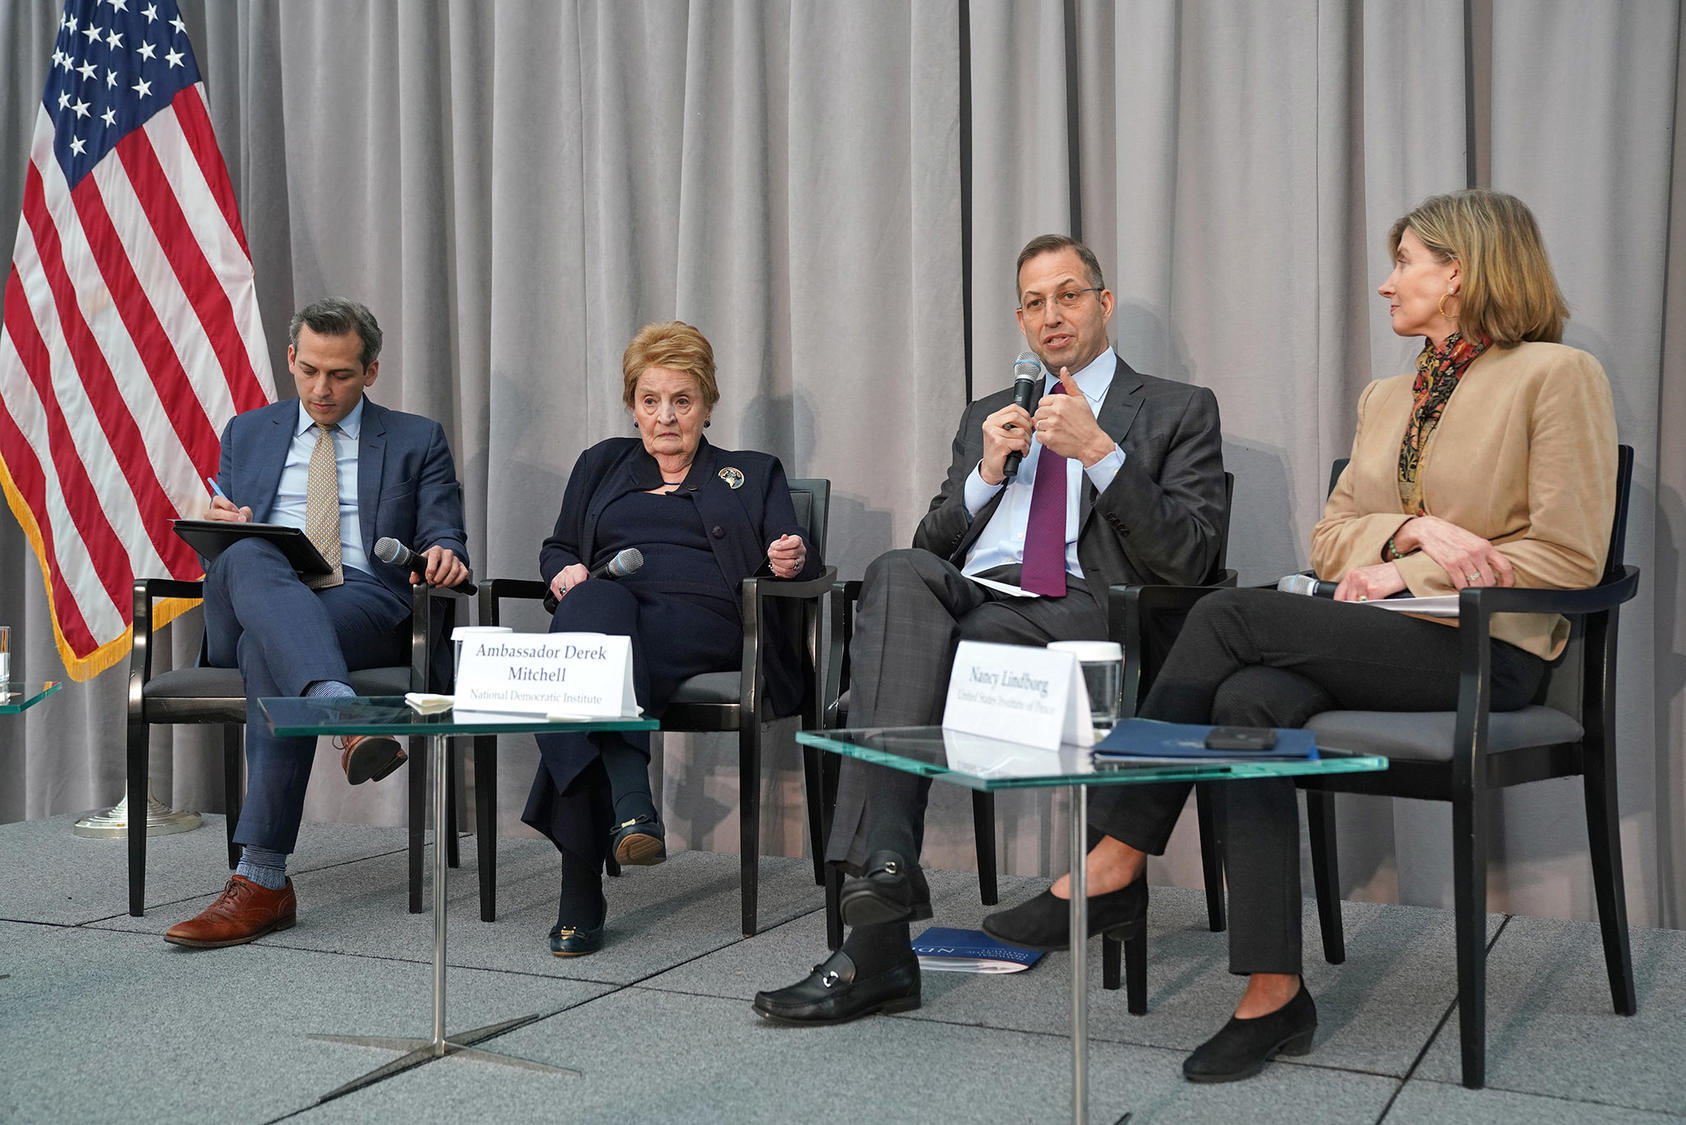 From left to right: PBS NewsHour’s Nick Schifrin, Former Secretary of State Madeline Albright, NDI President Amb. Derek Mitchell and USIP President & CEO Nancy Lindborg at USIP.